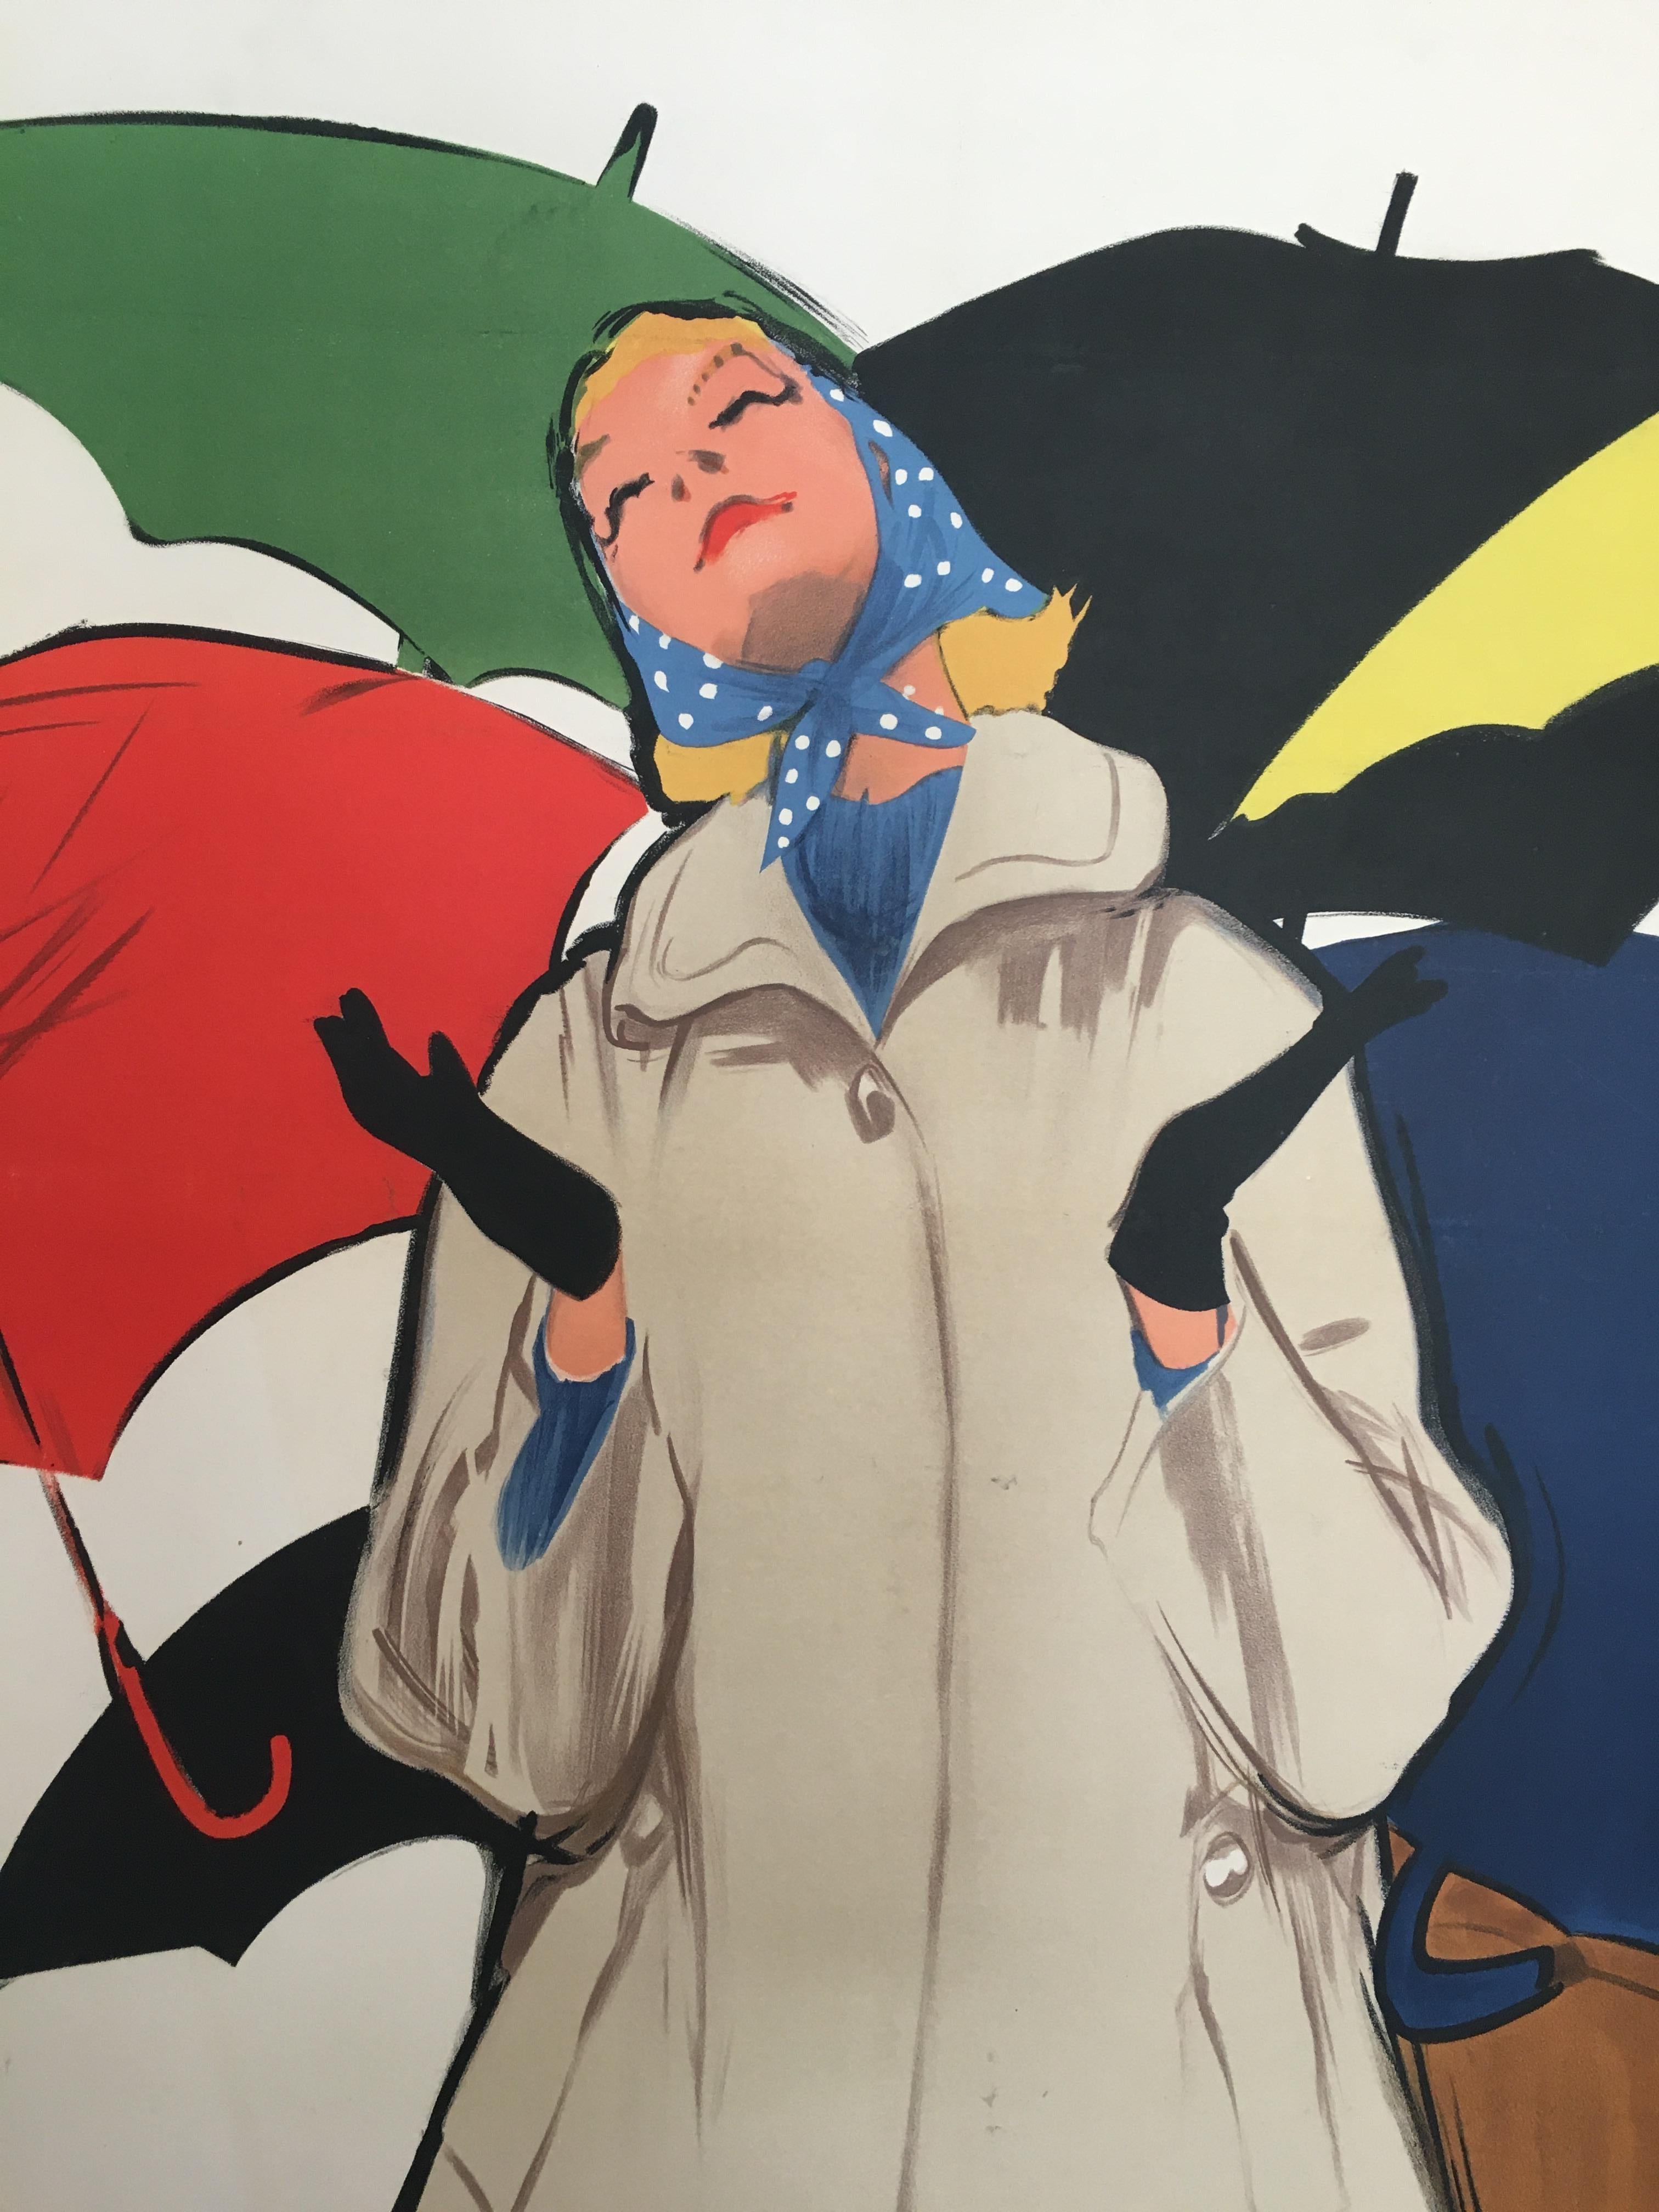 Original vintage French fashion advertisement poster Blizzand umbrellas by Gruau

Gruau’s fashion illustrations epitomize the glamour and sophistication of fifties couture, gracing the era’s most iconic magazines and advertisements, from Vogue and